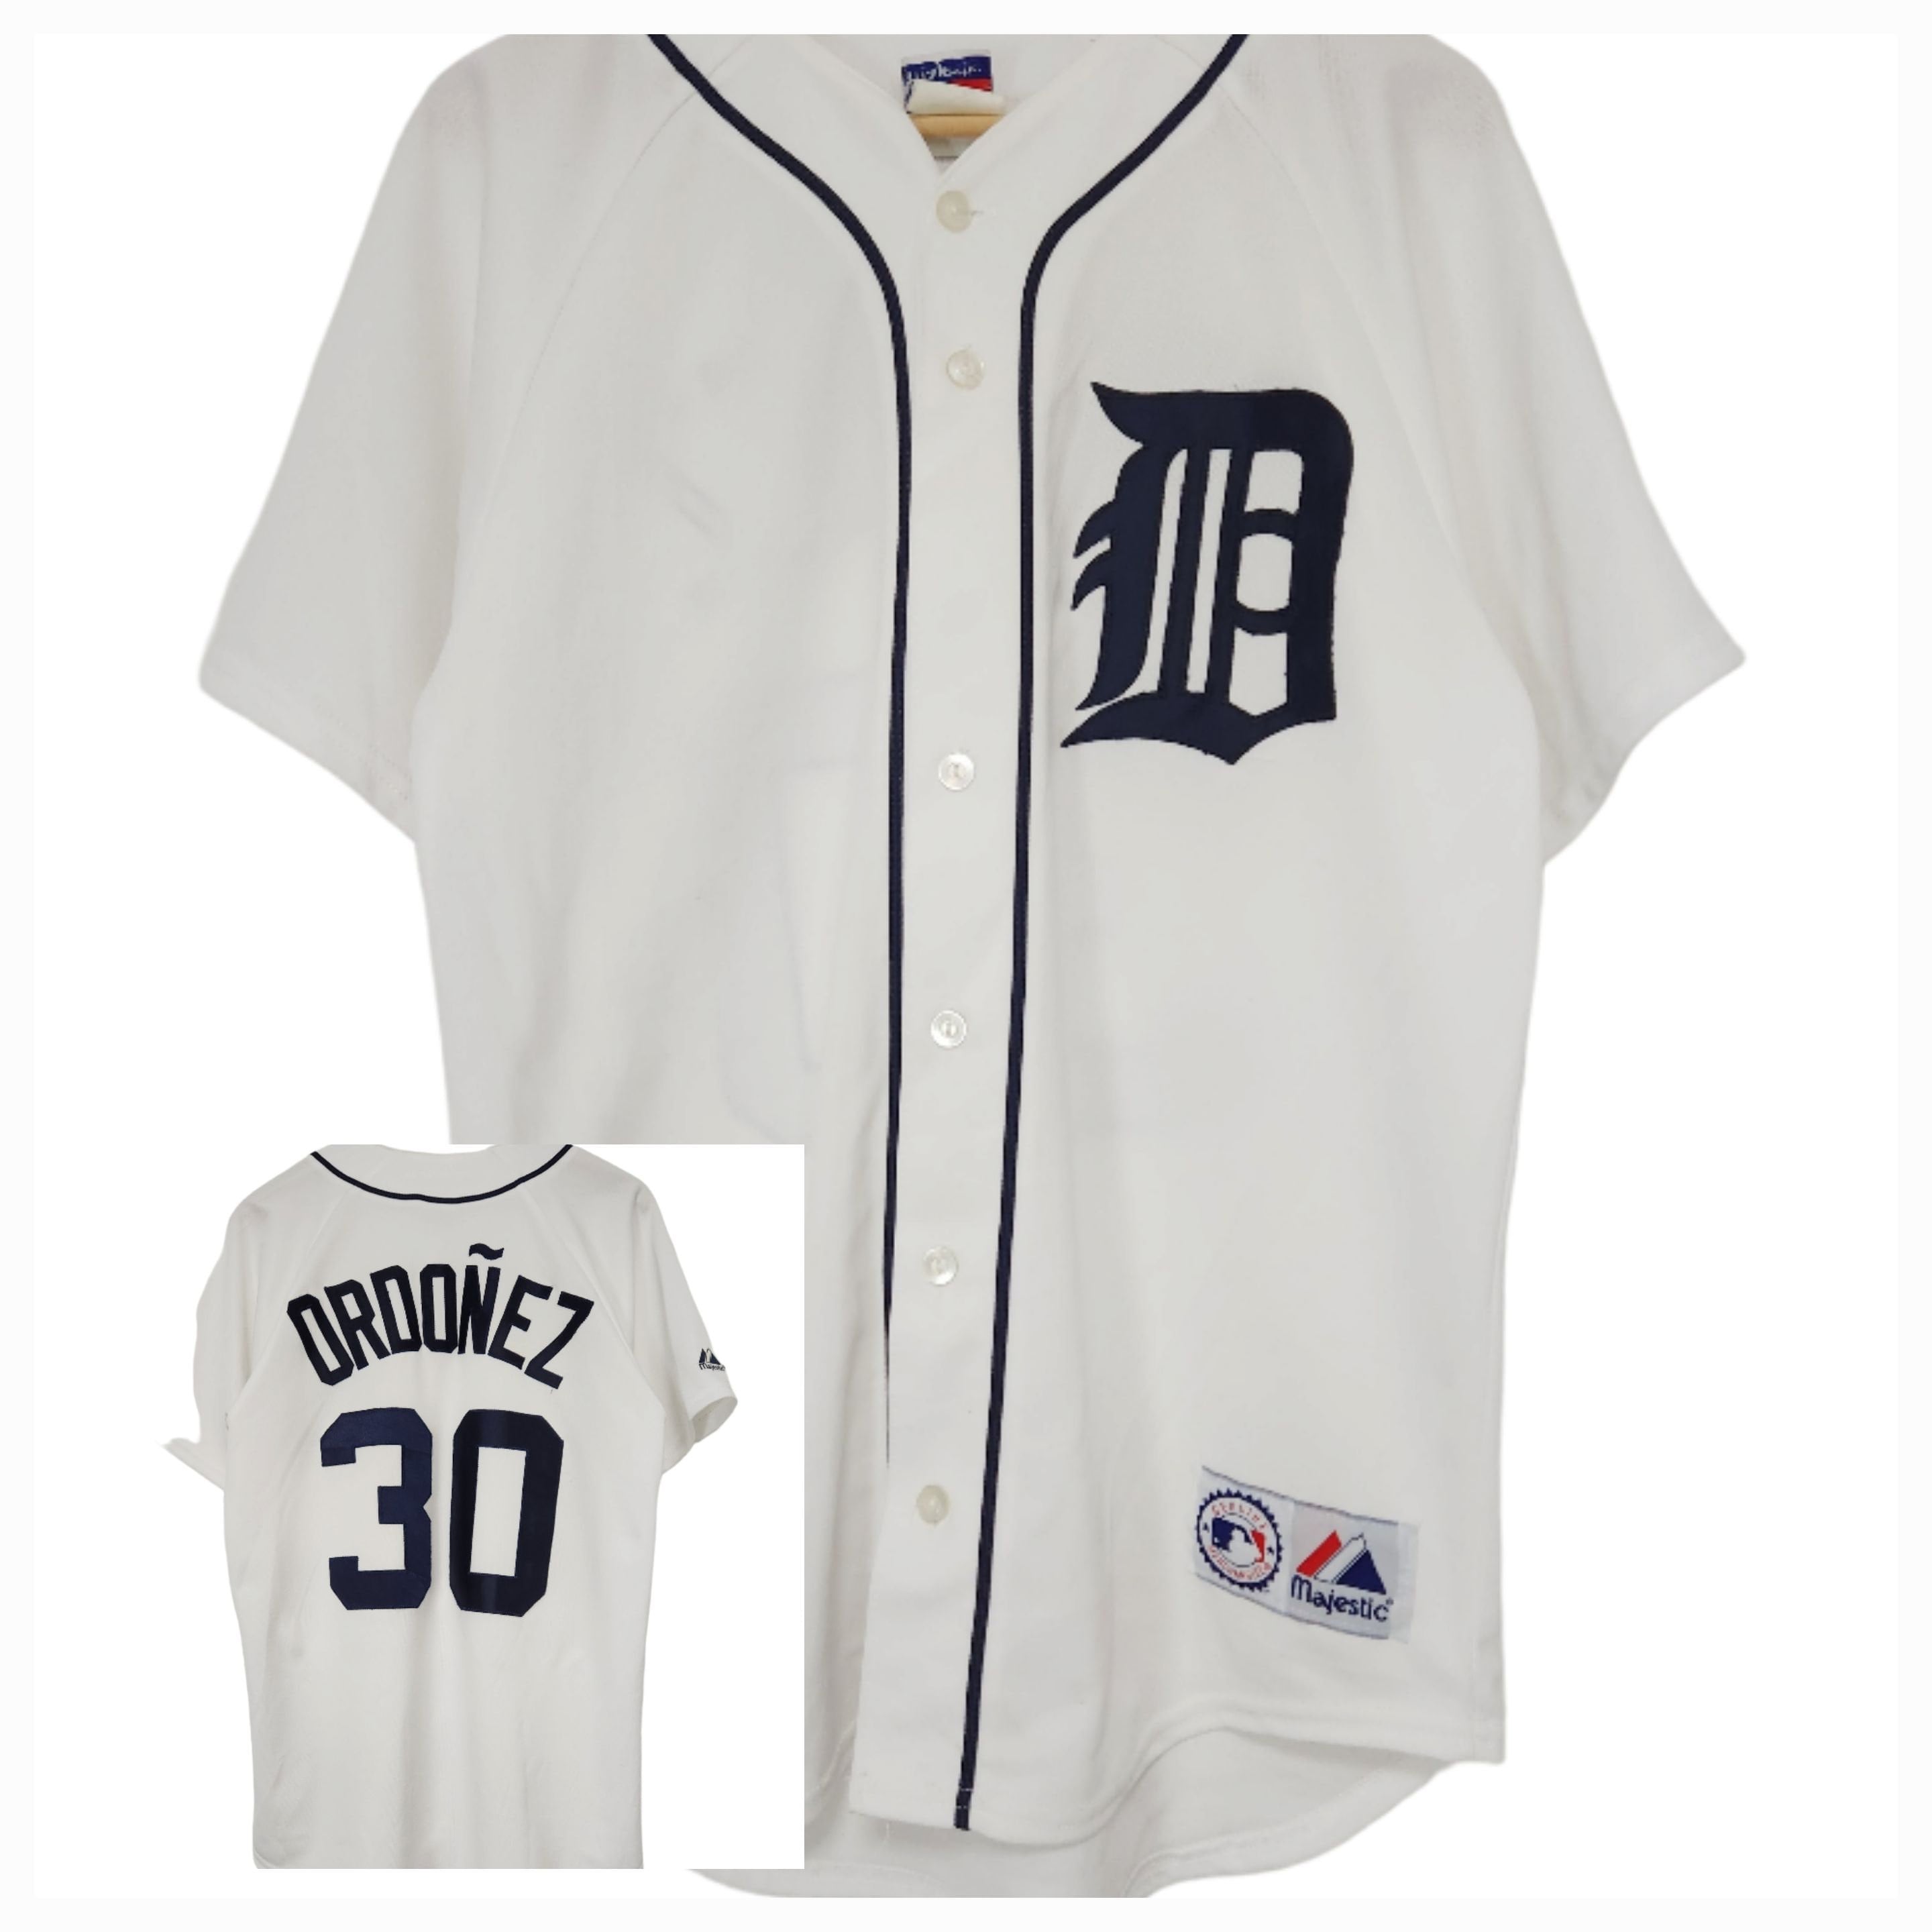 Majestic Detroit Tigers Road Gray Al Kaline Cooperstown 1984 Cool Base  Replica Jersey